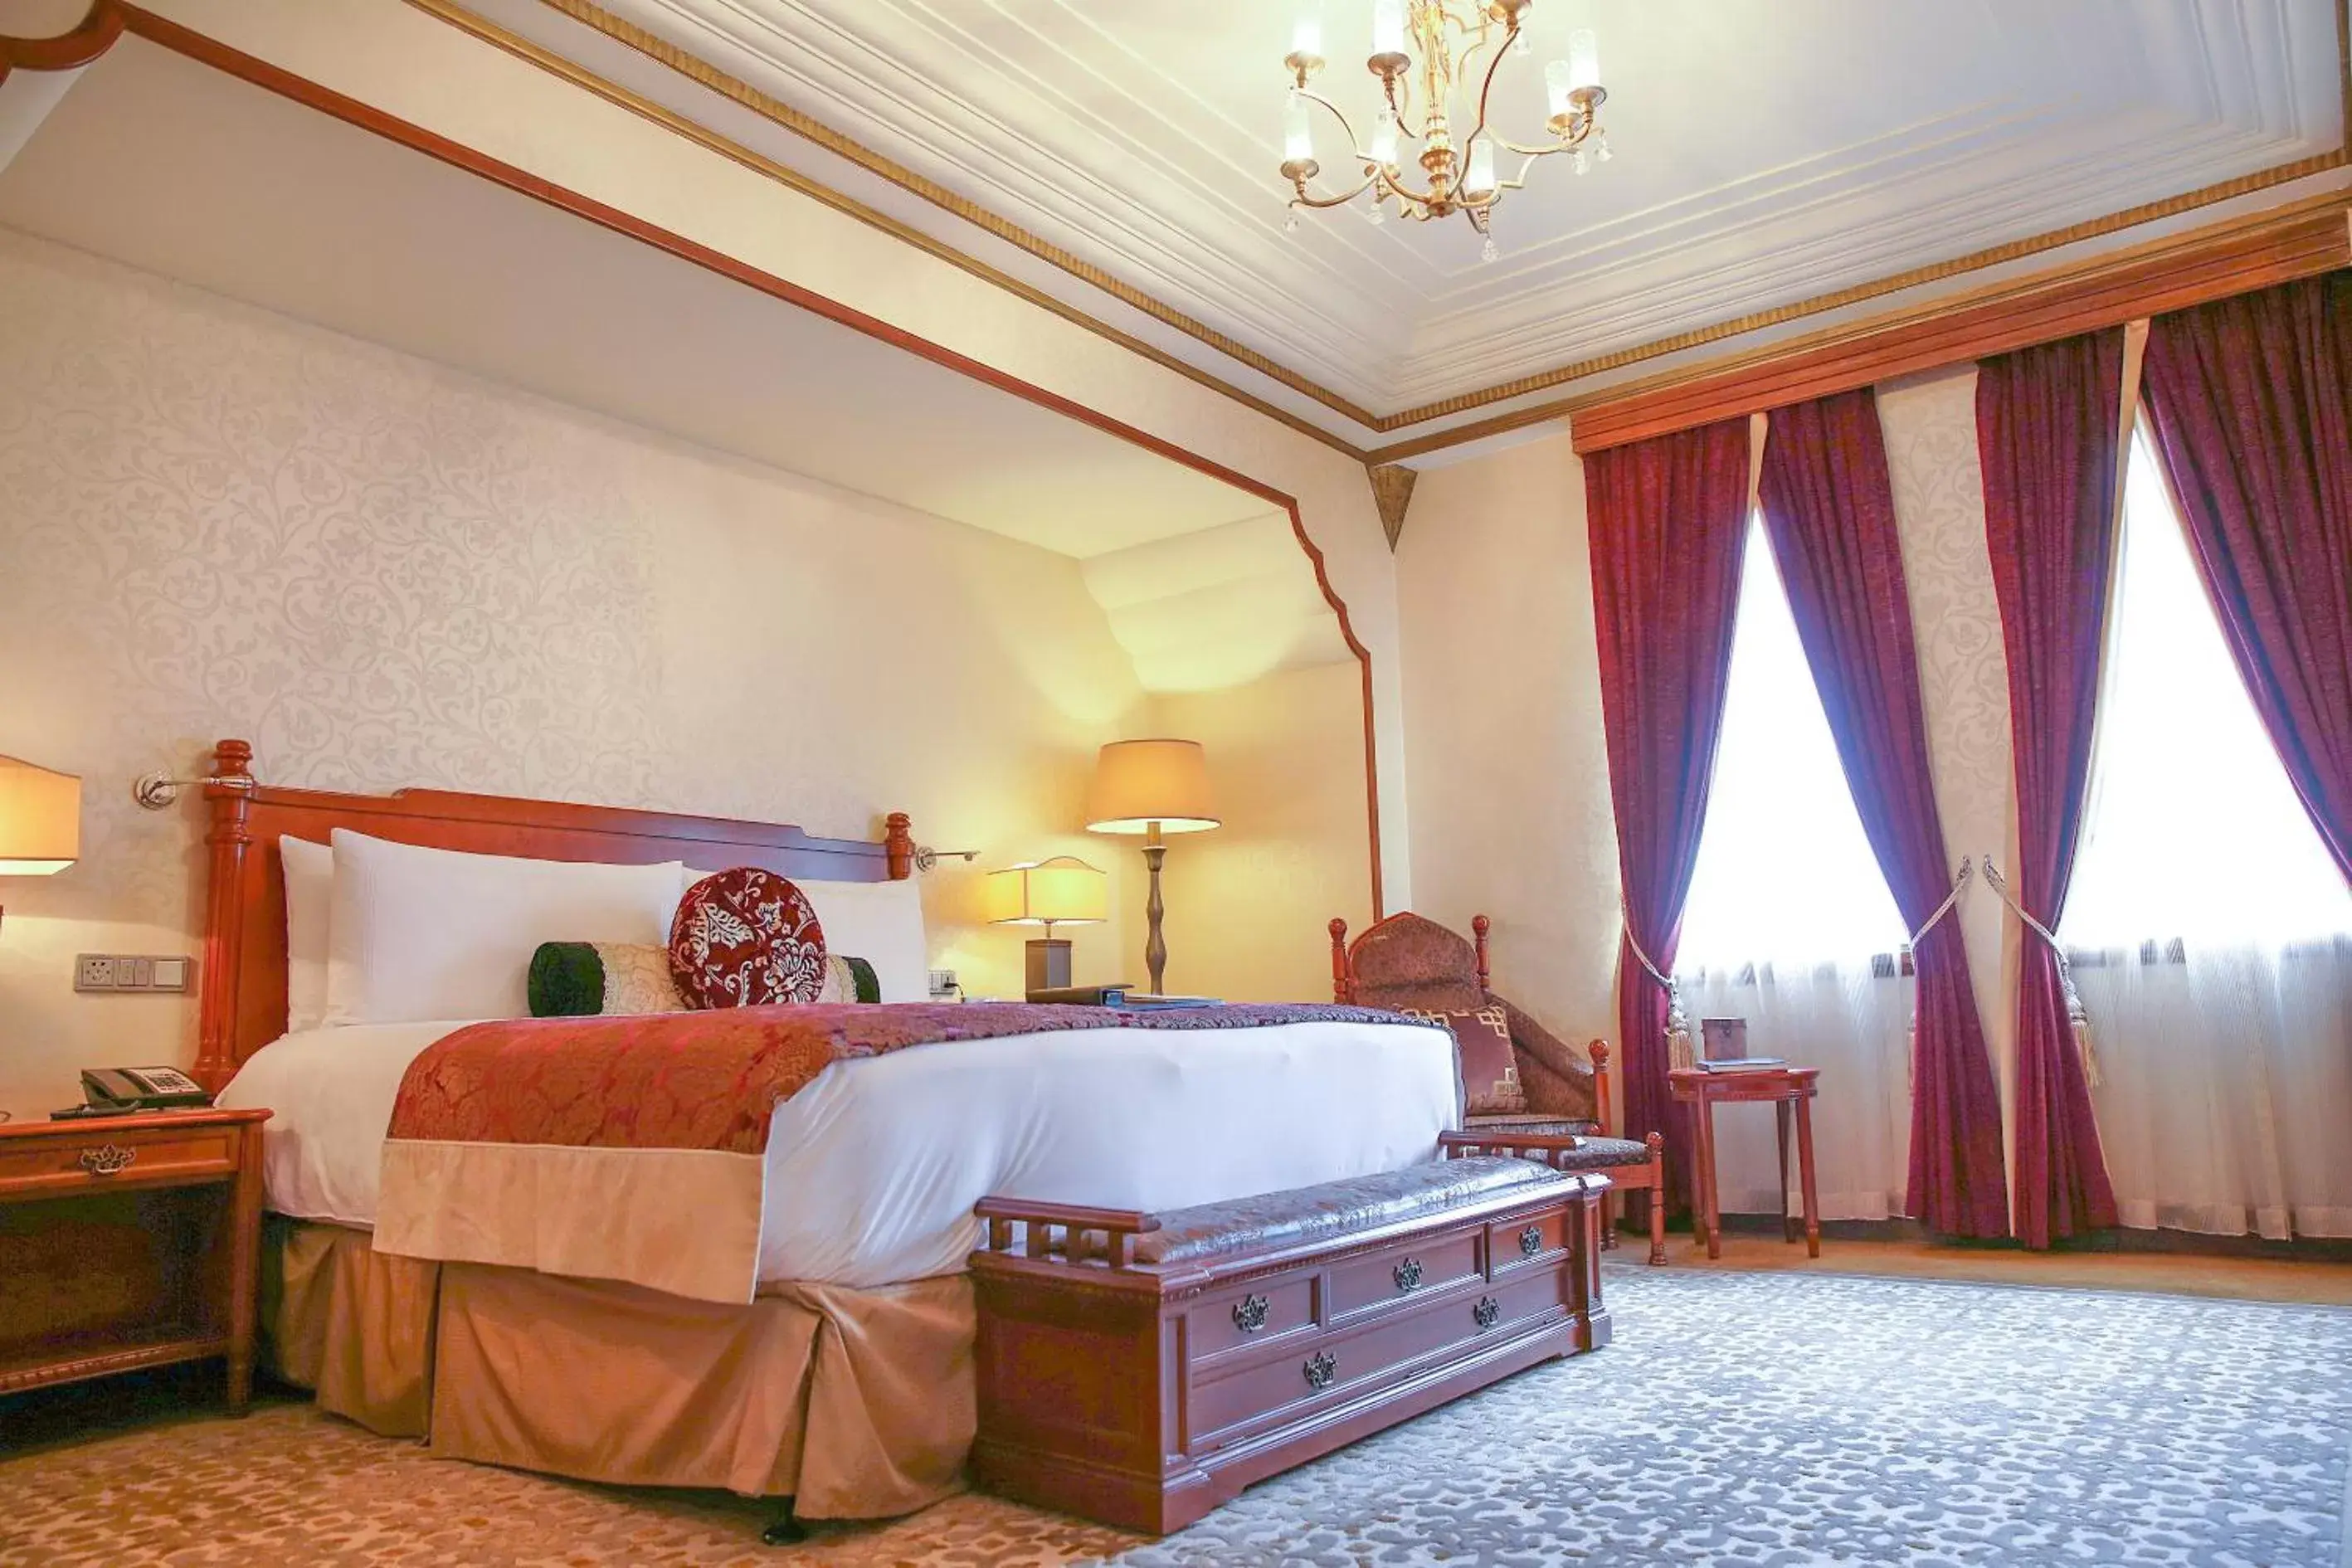 Bedroom, Bed in Fairmont Peace Hotel On the Bund (Start your own story with the BUND)